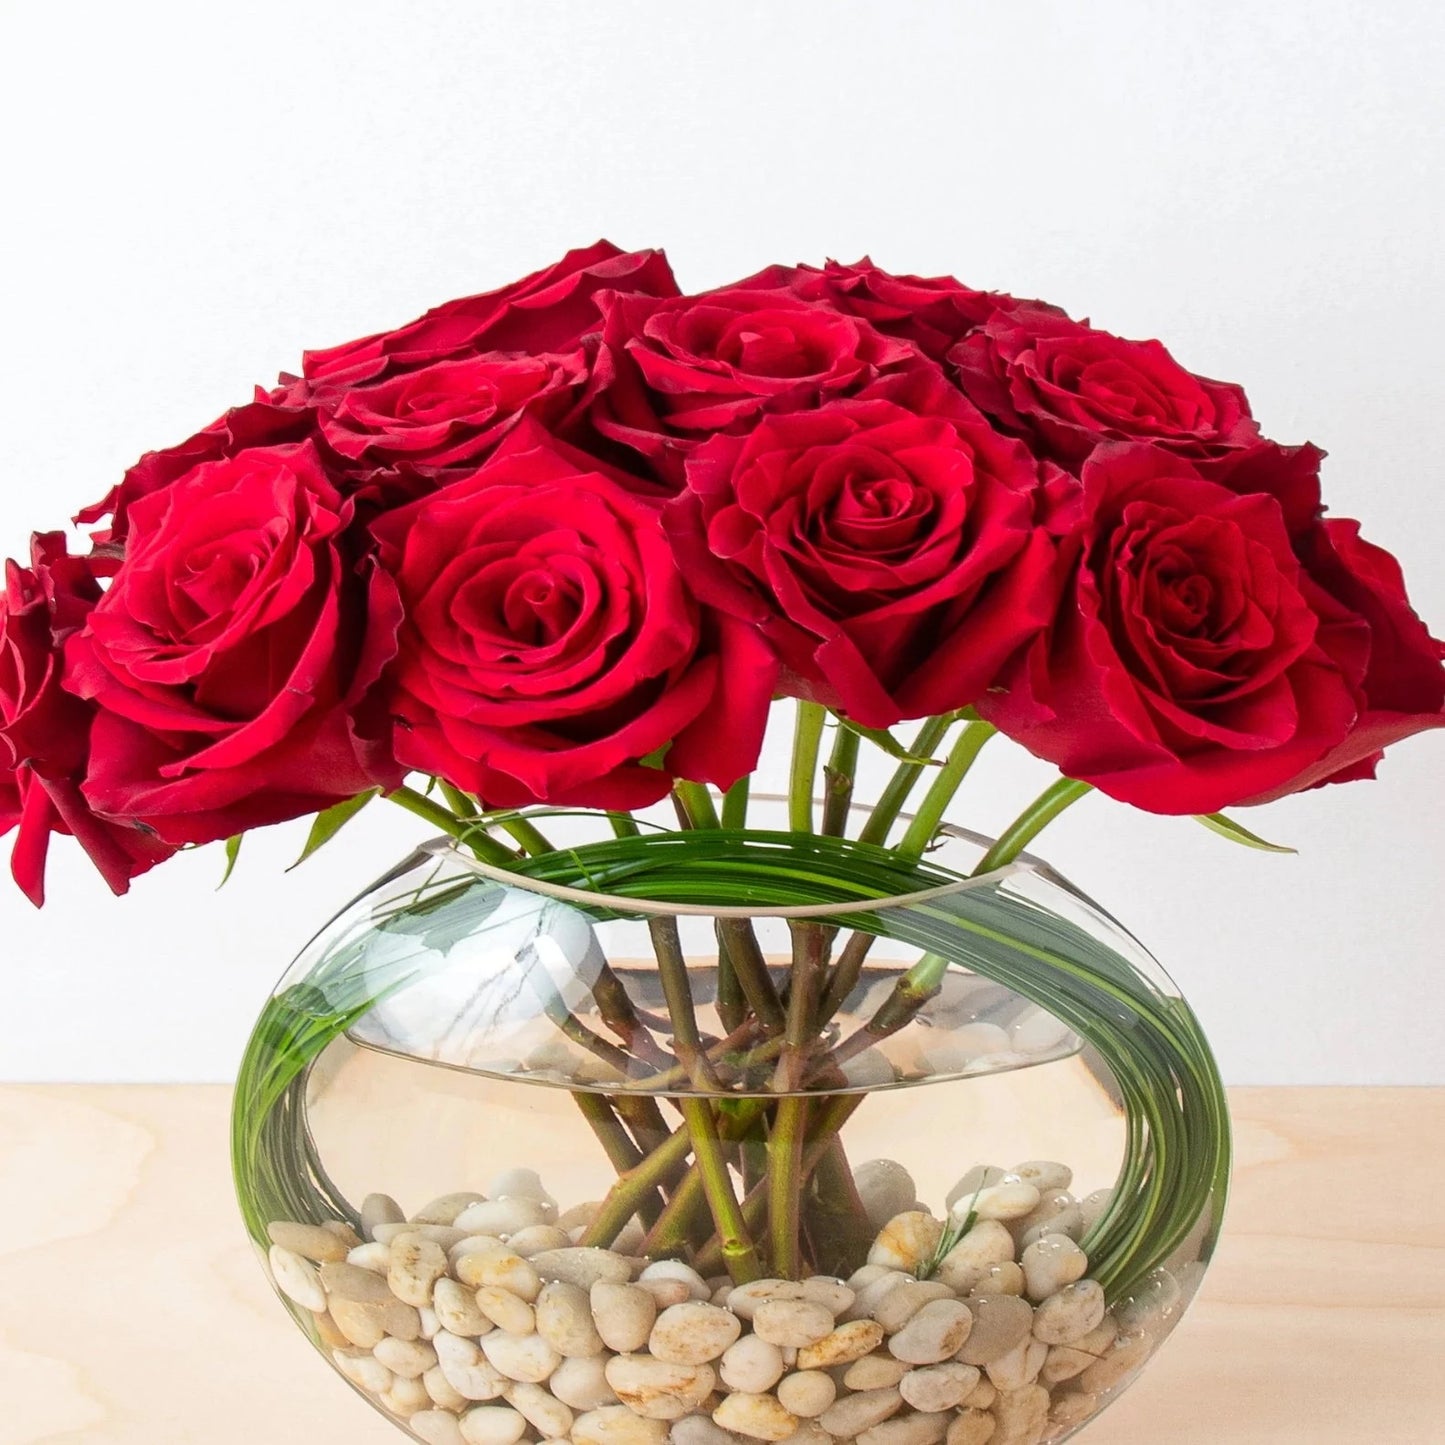 Red roses, but with a contemporary twist. Red novelty Explorer flowers in a new and trendy style. In a flat fishbowl, natural boulders and bear grass are accented.  NOTE: Pure white rocks will be used in place of natural rocks (as shown).